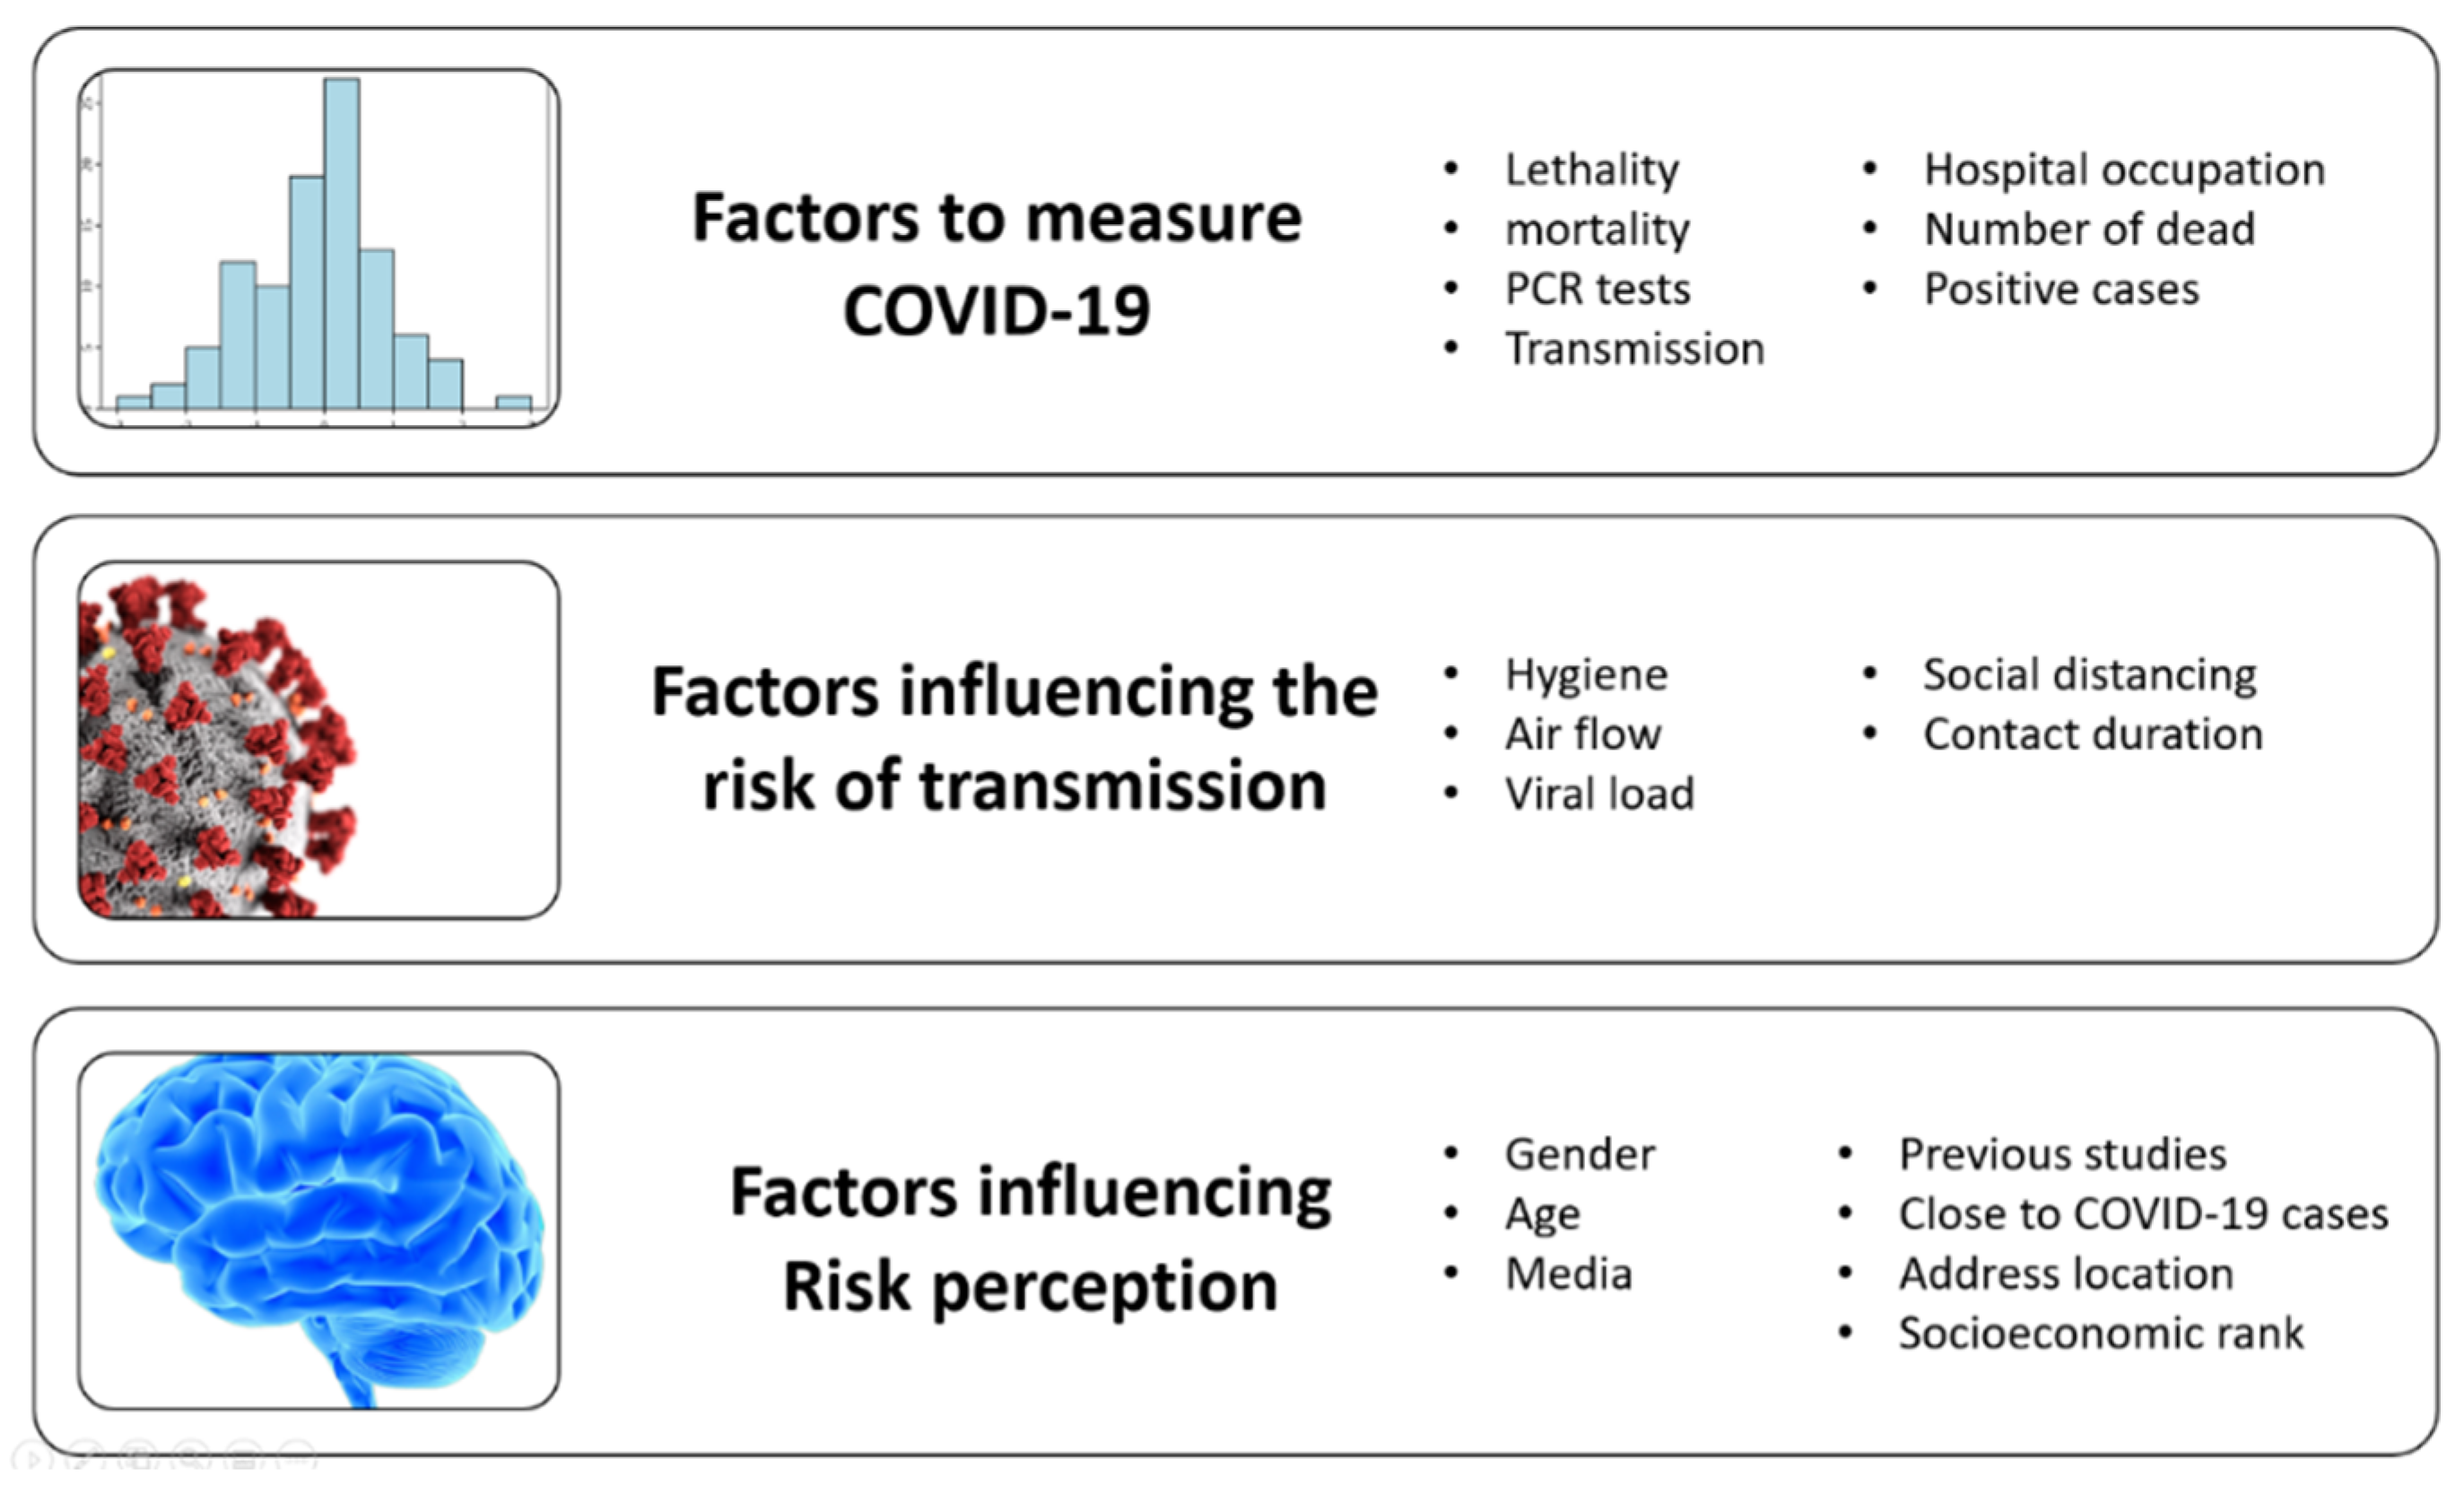 Newswise: Addressing Real and Perceived Risks Associated with COVID-19